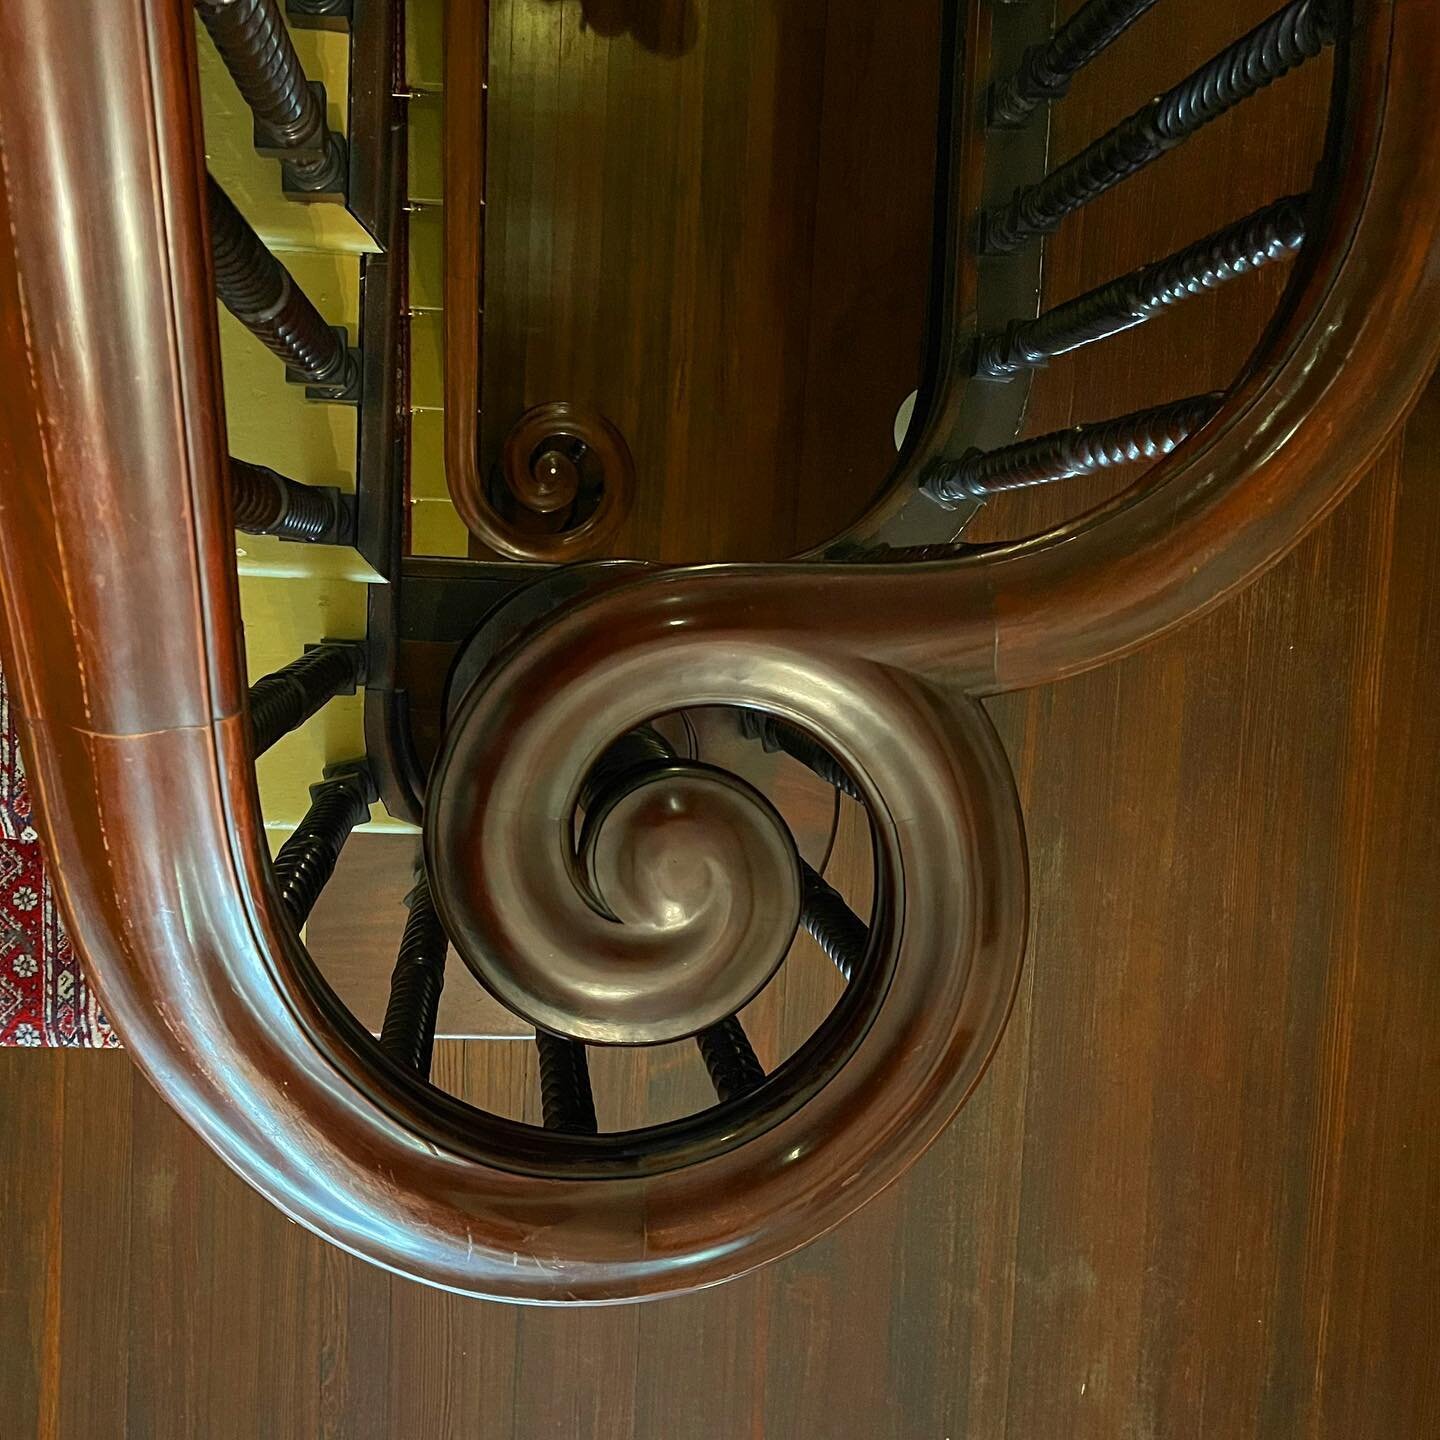 Great architecture has absolutely nothing to do with style&hellip; it has everything to do with culture and craftsmanship&hellip;
.
A handcrafted stairway handrail and newel at the historic John Brown House experienced during a wonderful @icaanewengl